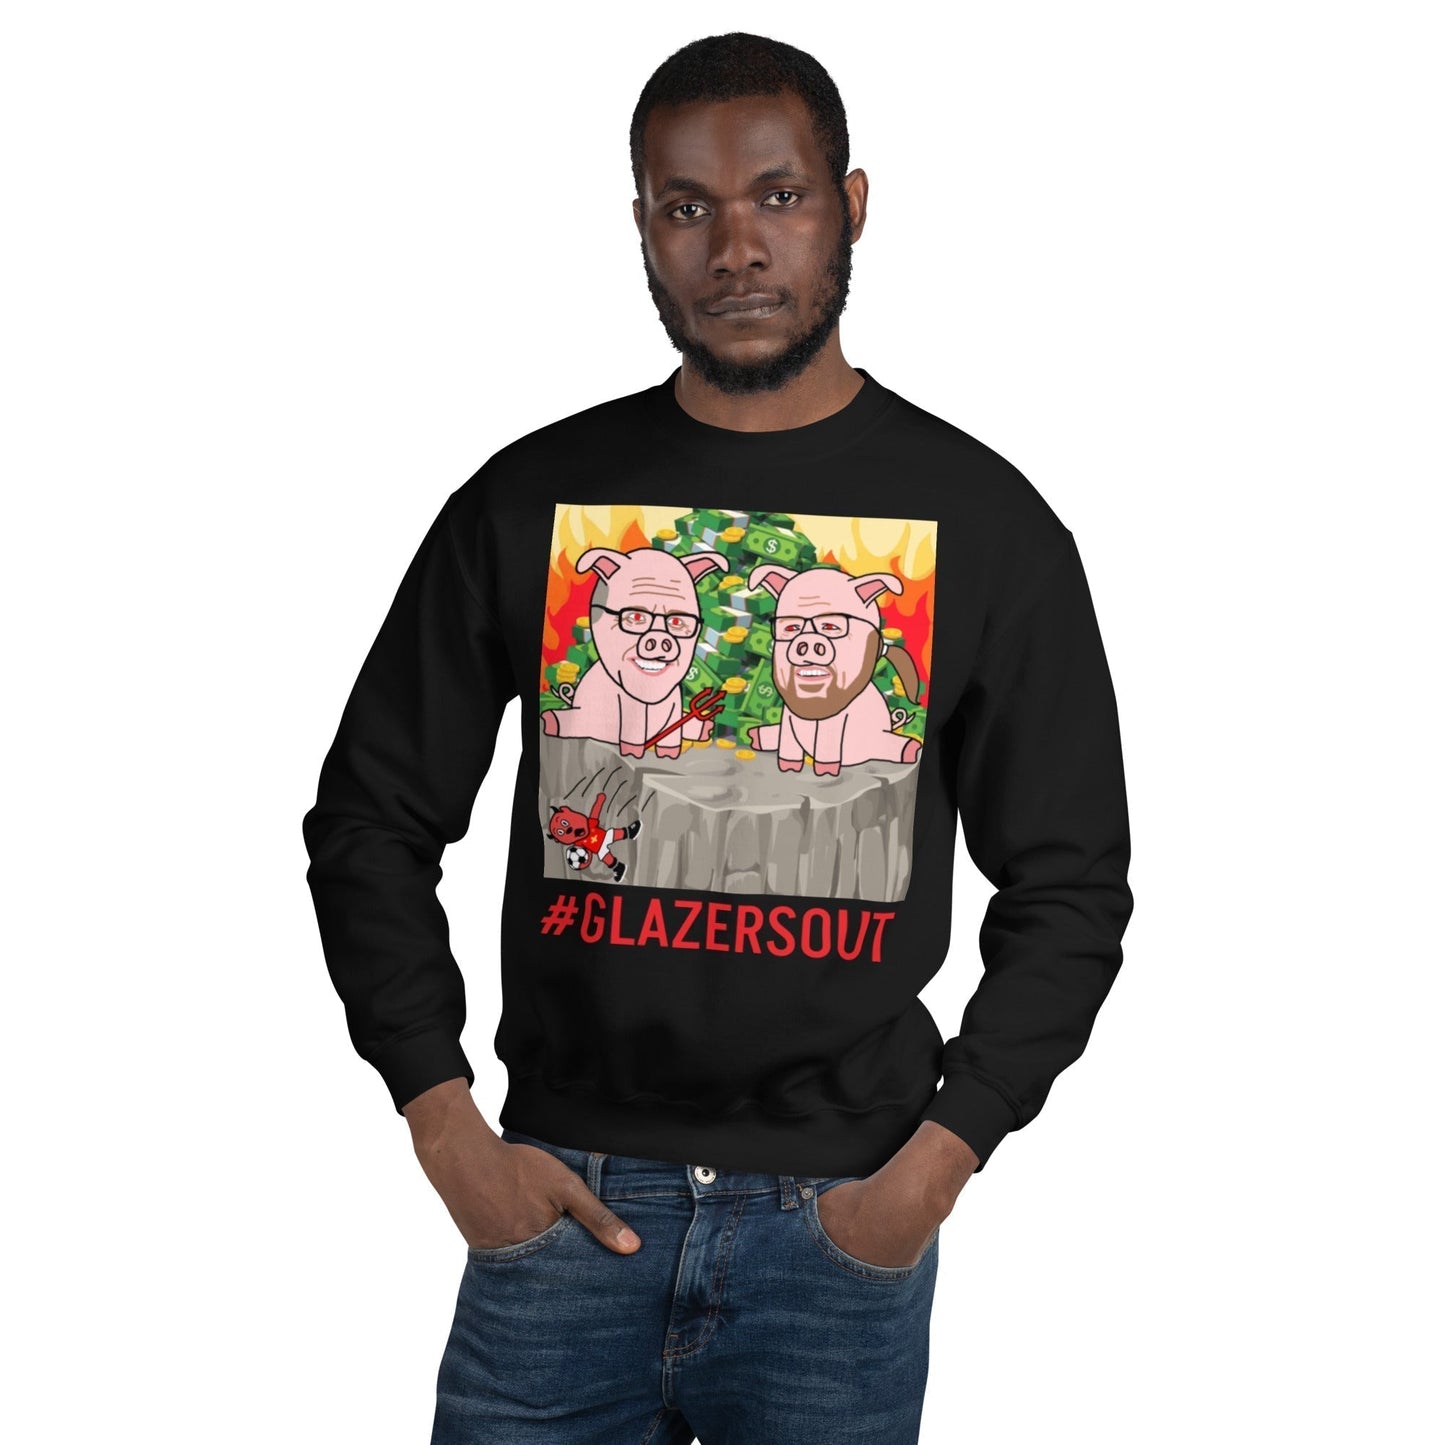 Glazers Out Manchester United Unisex Sweatshirt, Red Letters, #GlazersOut Next Cult Brand Football, GlazersOut, Manchester United